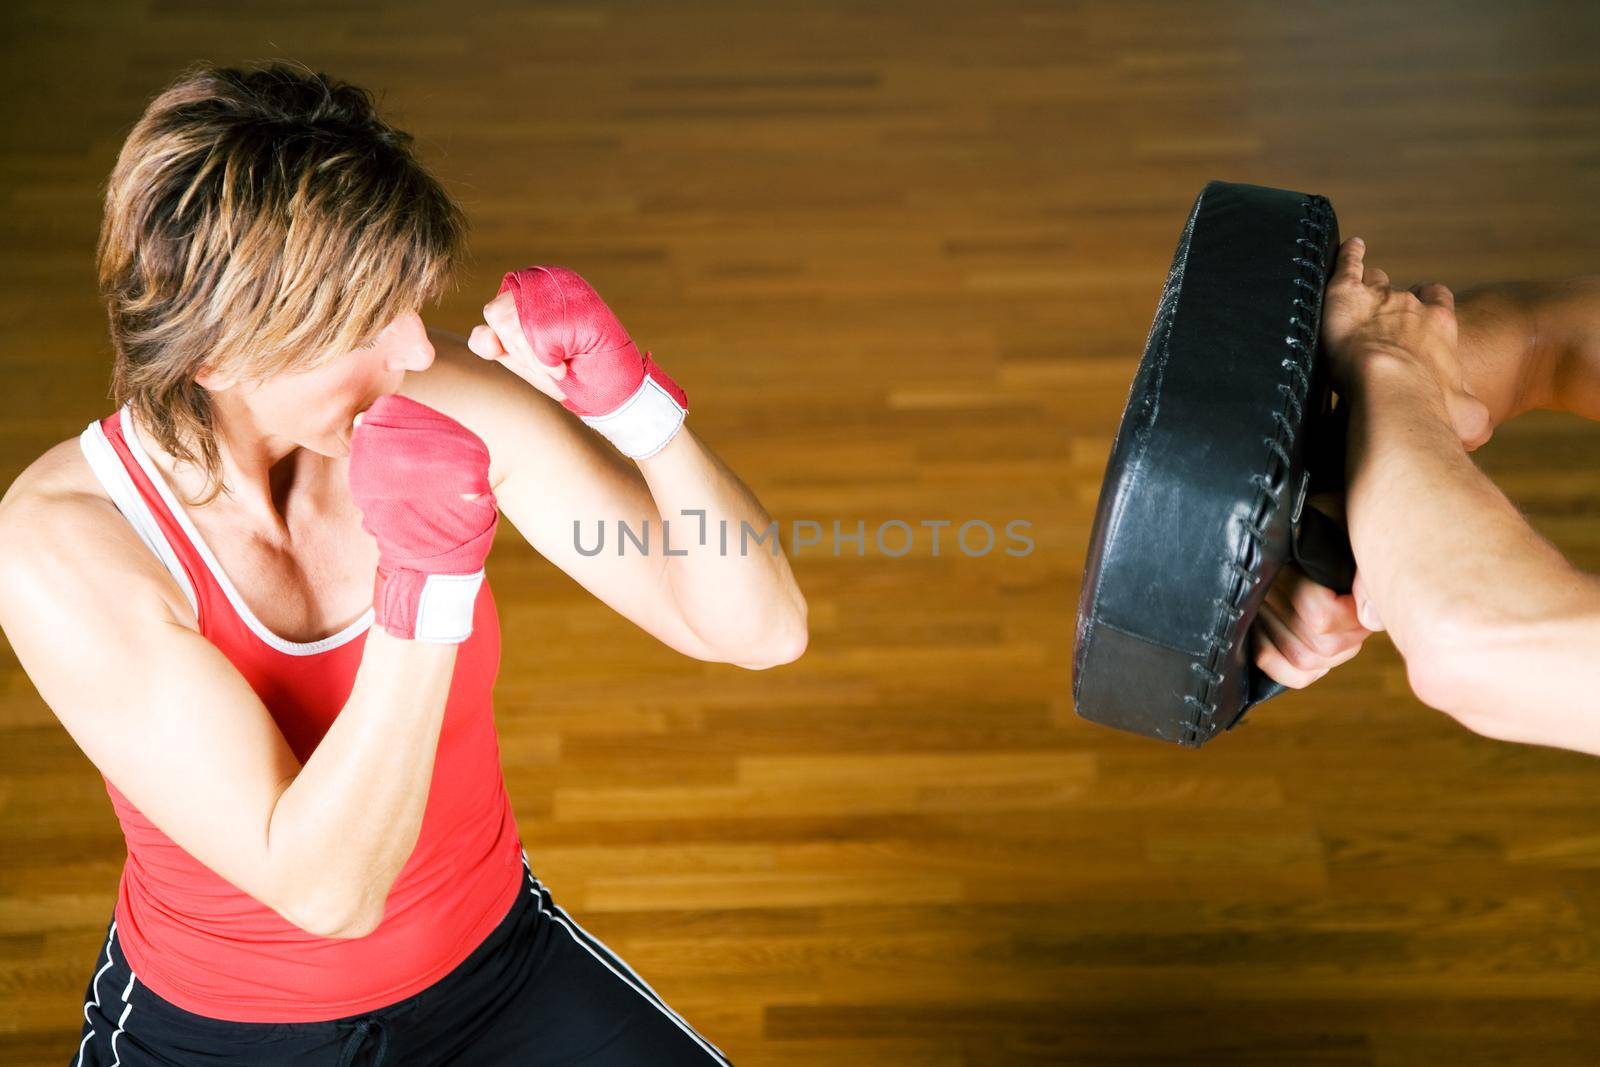 Sparring session in martial arts moves, couple exercising